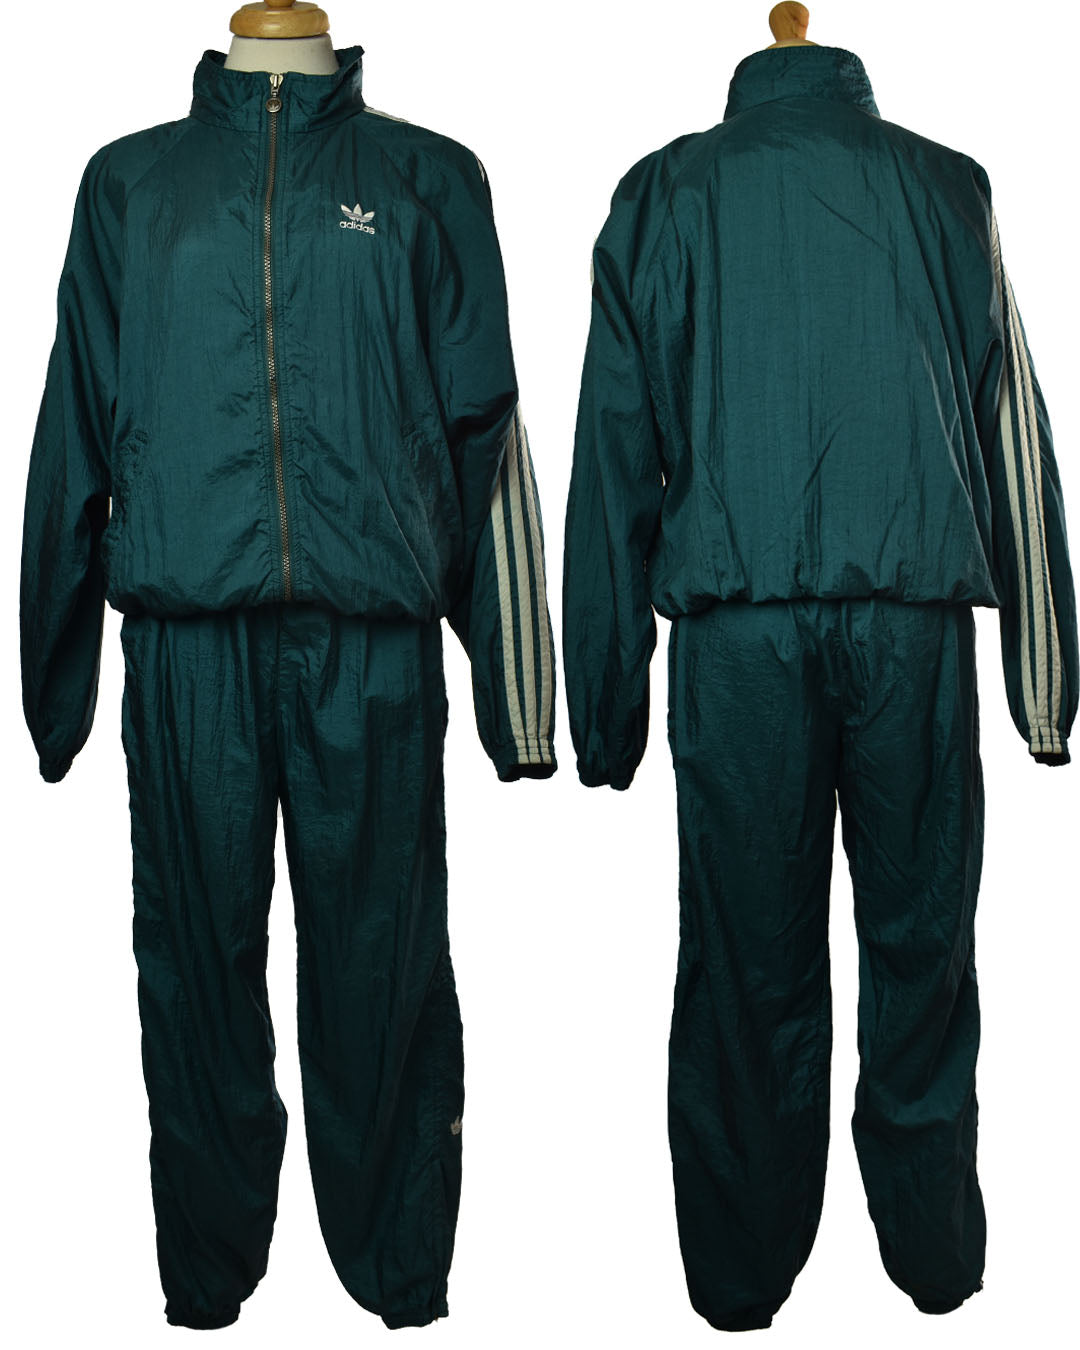 Vintage 90s Adidas Track Suit in Emerald Green Nylon Size M